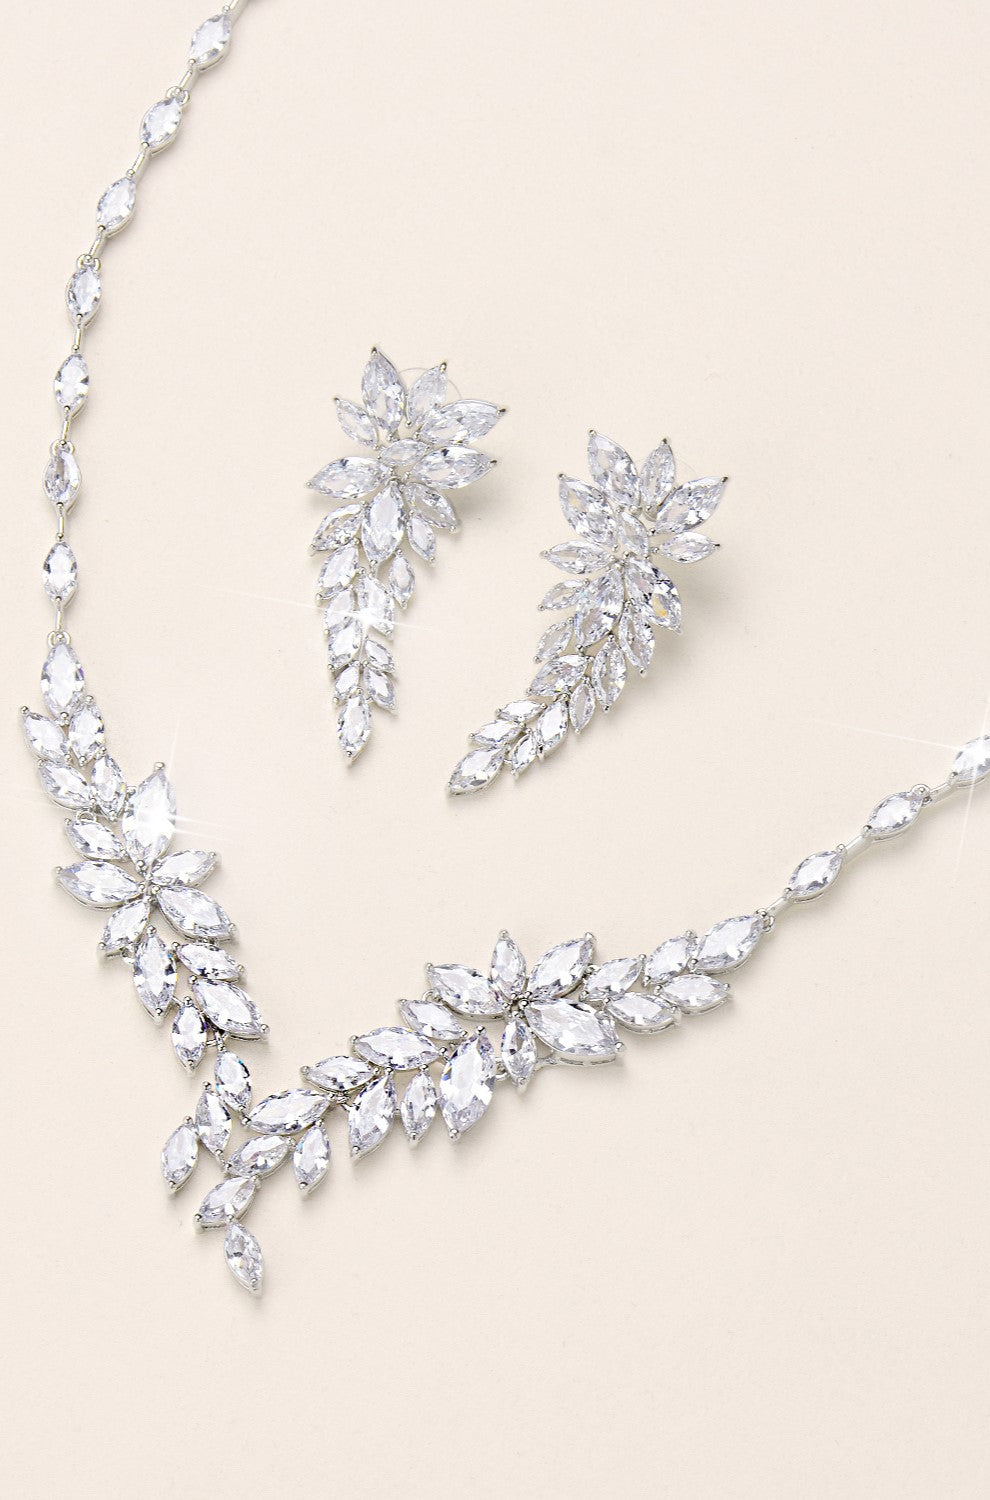 Alexia CZ Earrings and Necklace set 14K White Gold Plaited